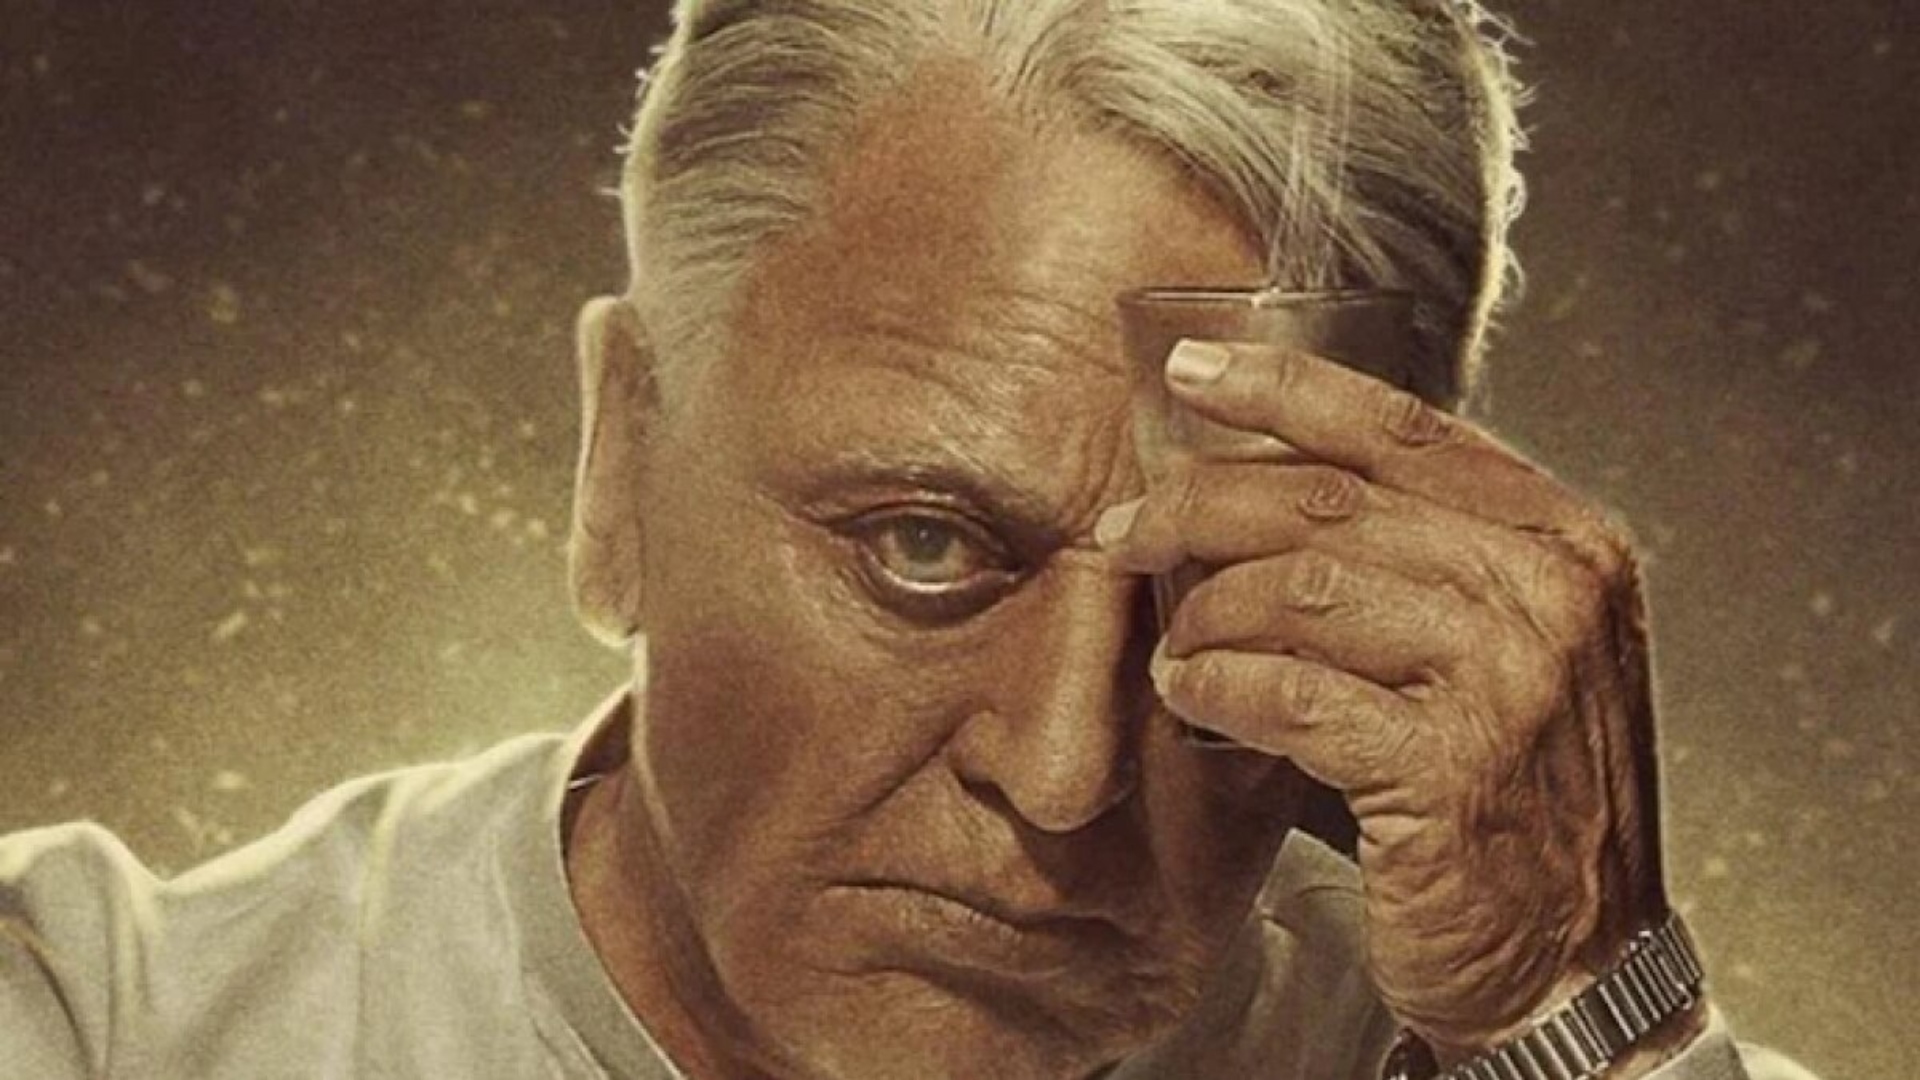 Kamal Haasan-led ‘Indian 2’ to Release in July? All We Know